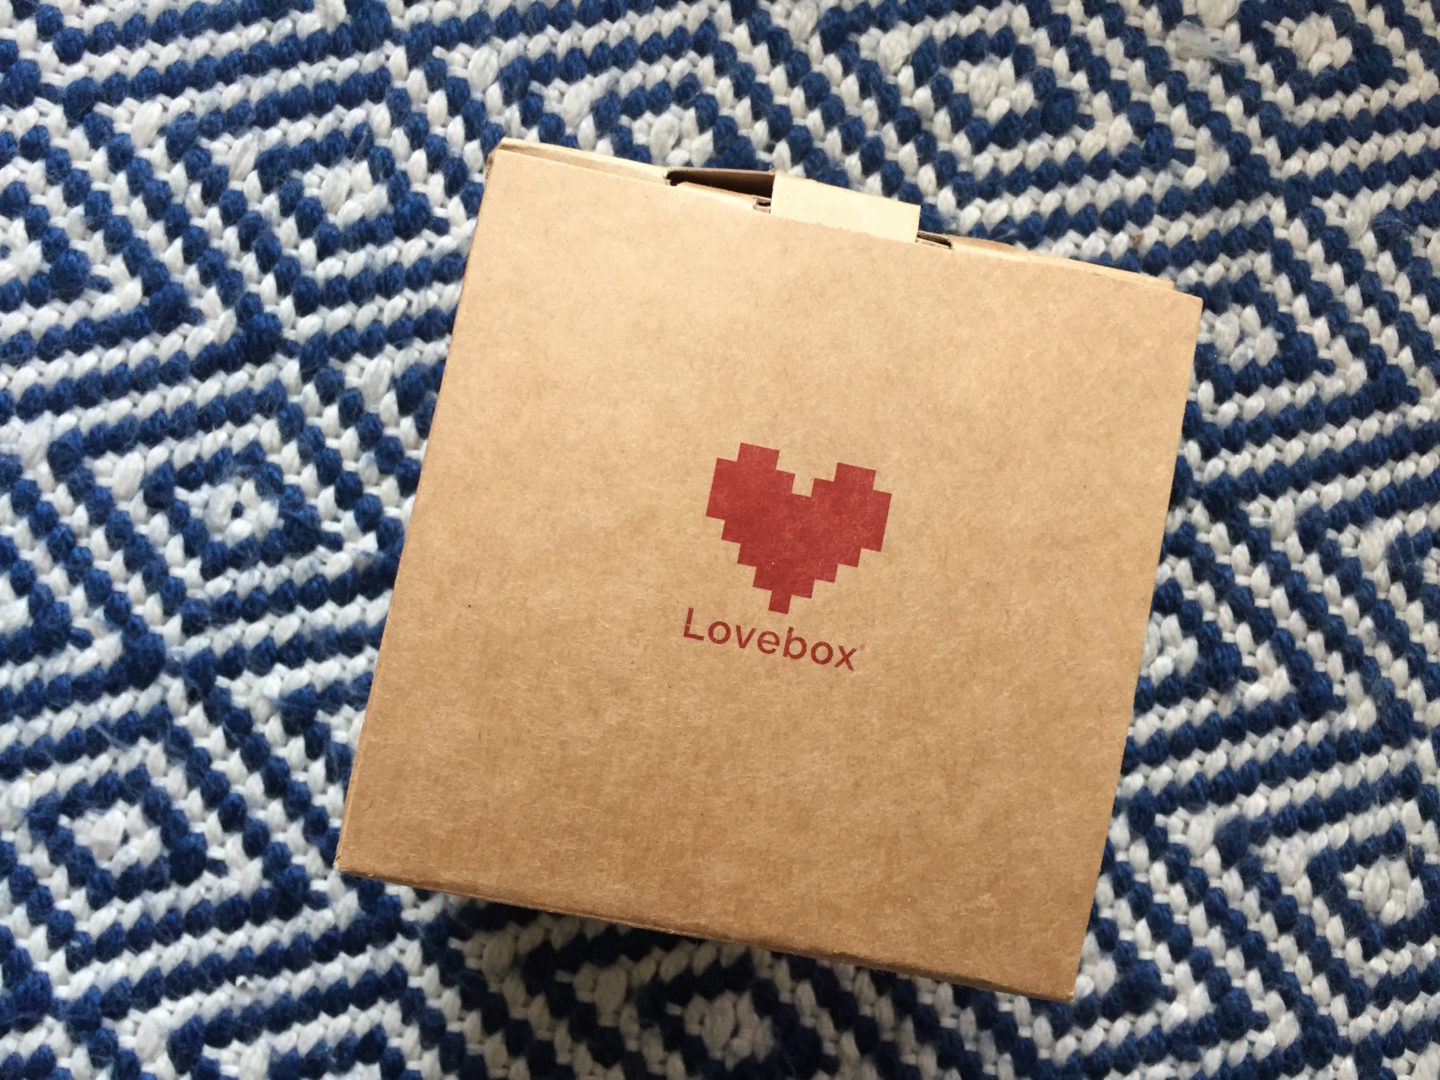 Send Some Love with Lovebox: The Modern Day Love Note Messenger